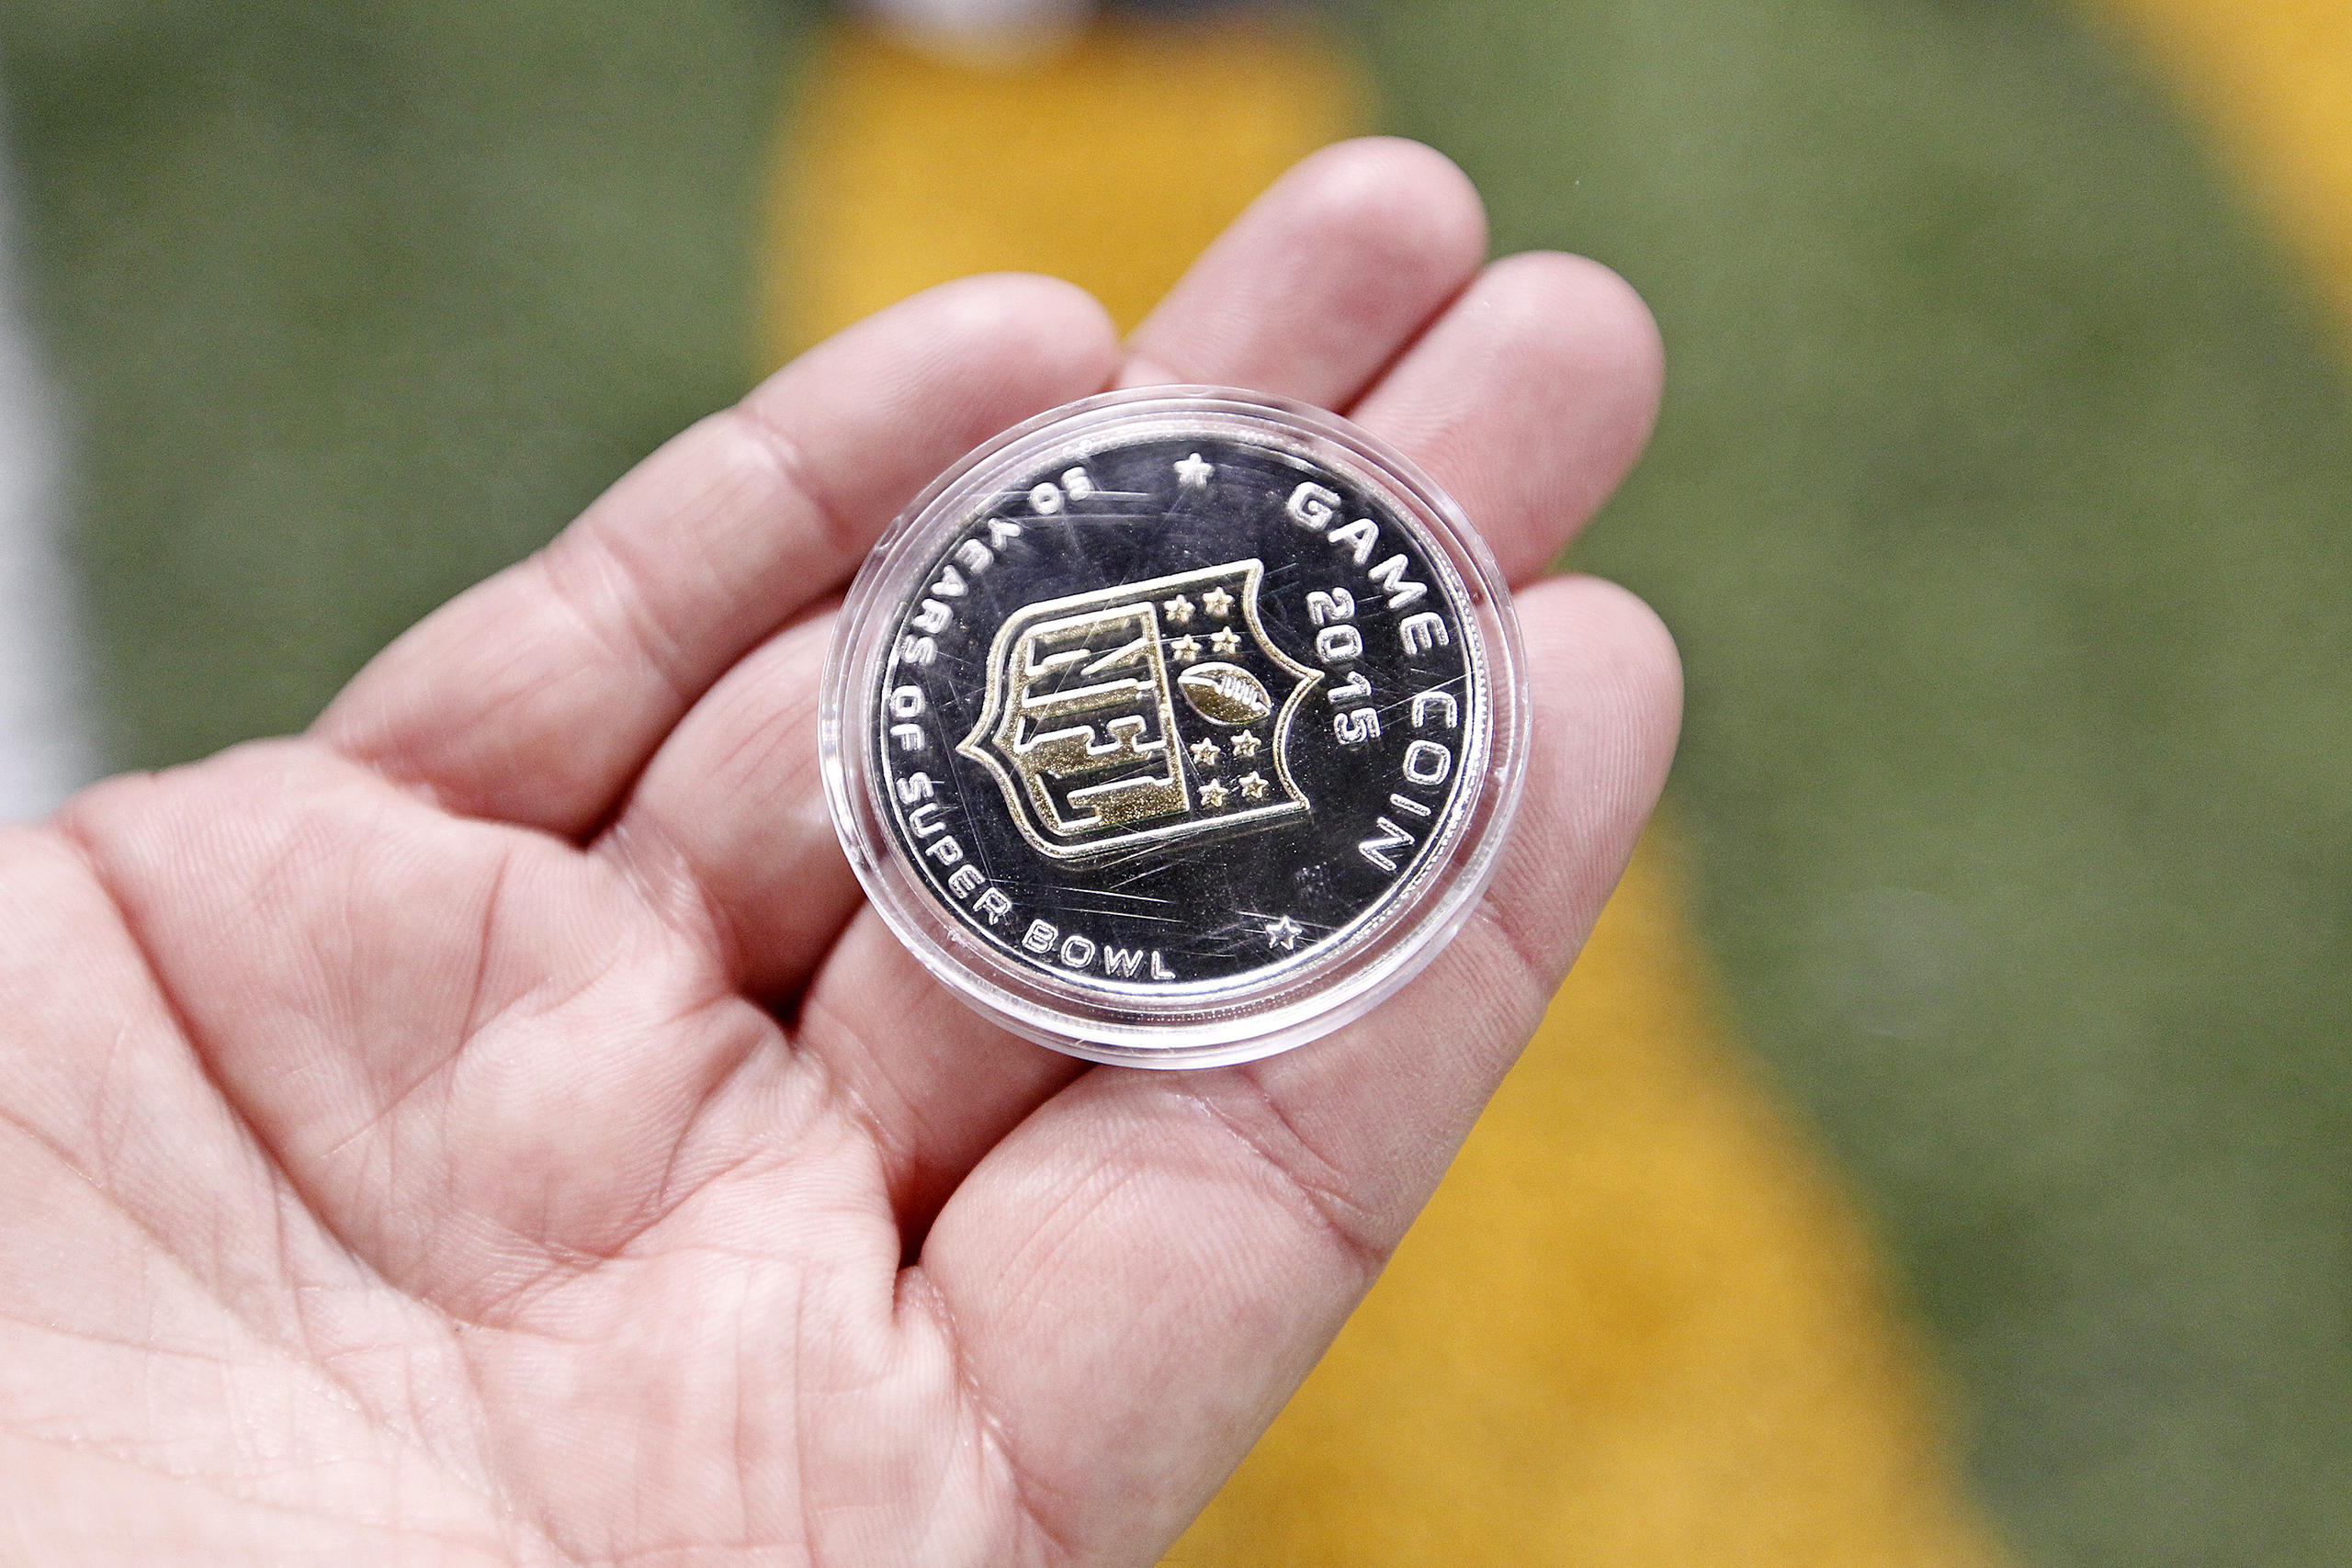 The coin toss: What could go wrong? | Football Zebras